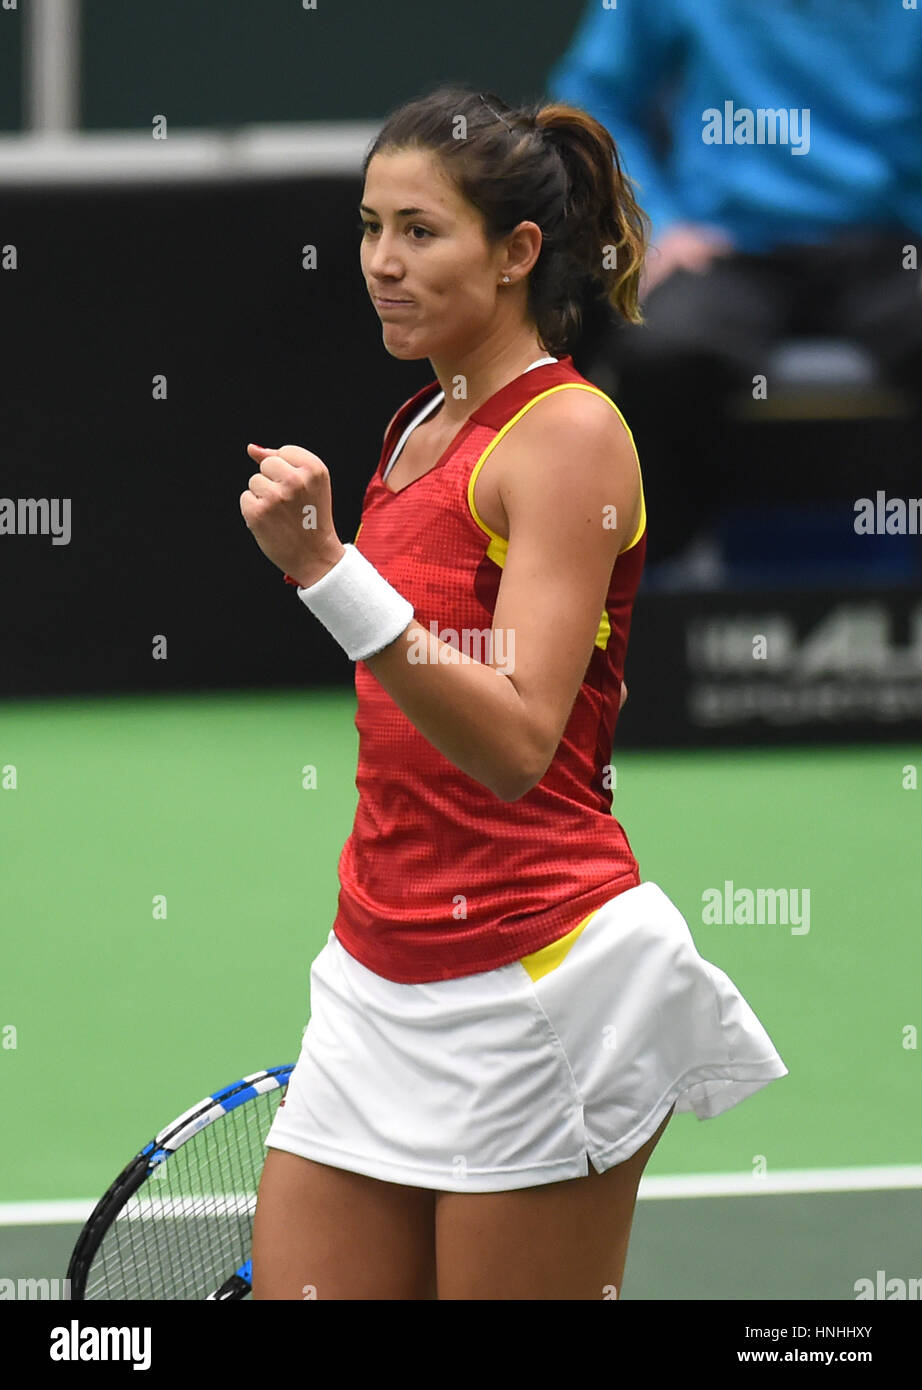 Tennis player Garbine Muguruza from Spain in action during the tennis match  of the Fed Cup 1st round between the Czech Republic (Barbora Strycova) and  Spain, in Ostrava, Czech Republic, on Saturday,